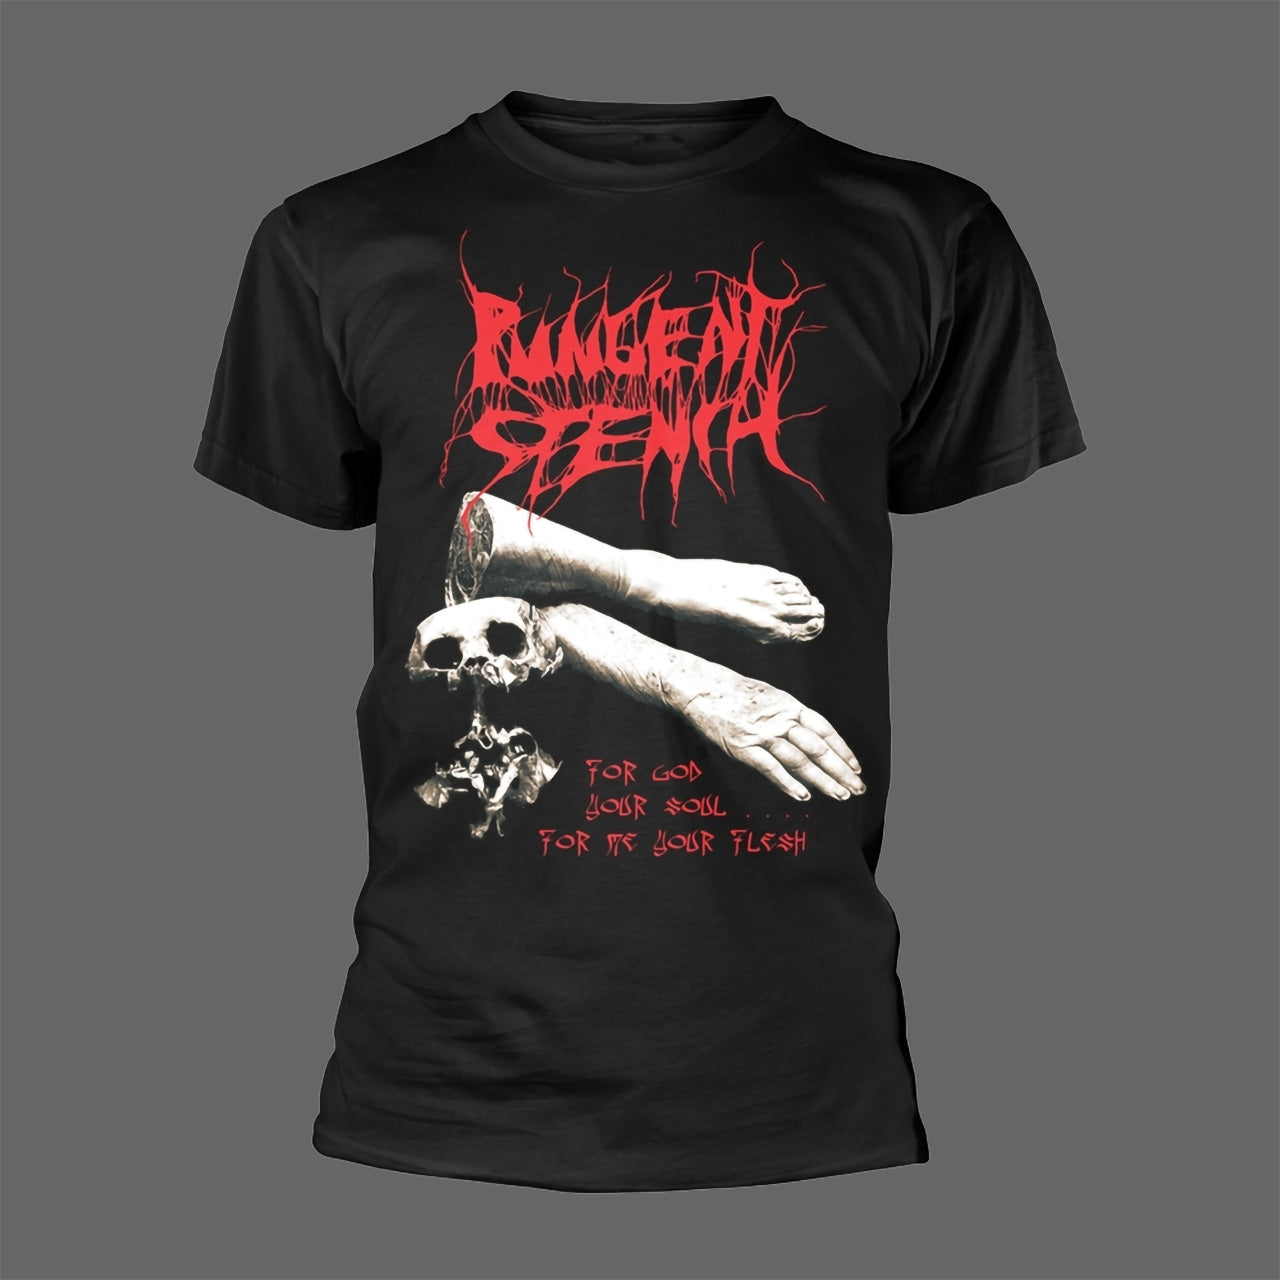 Pungent Stench - For God Your Soul... For Me Your Flesh (T-Shirt)